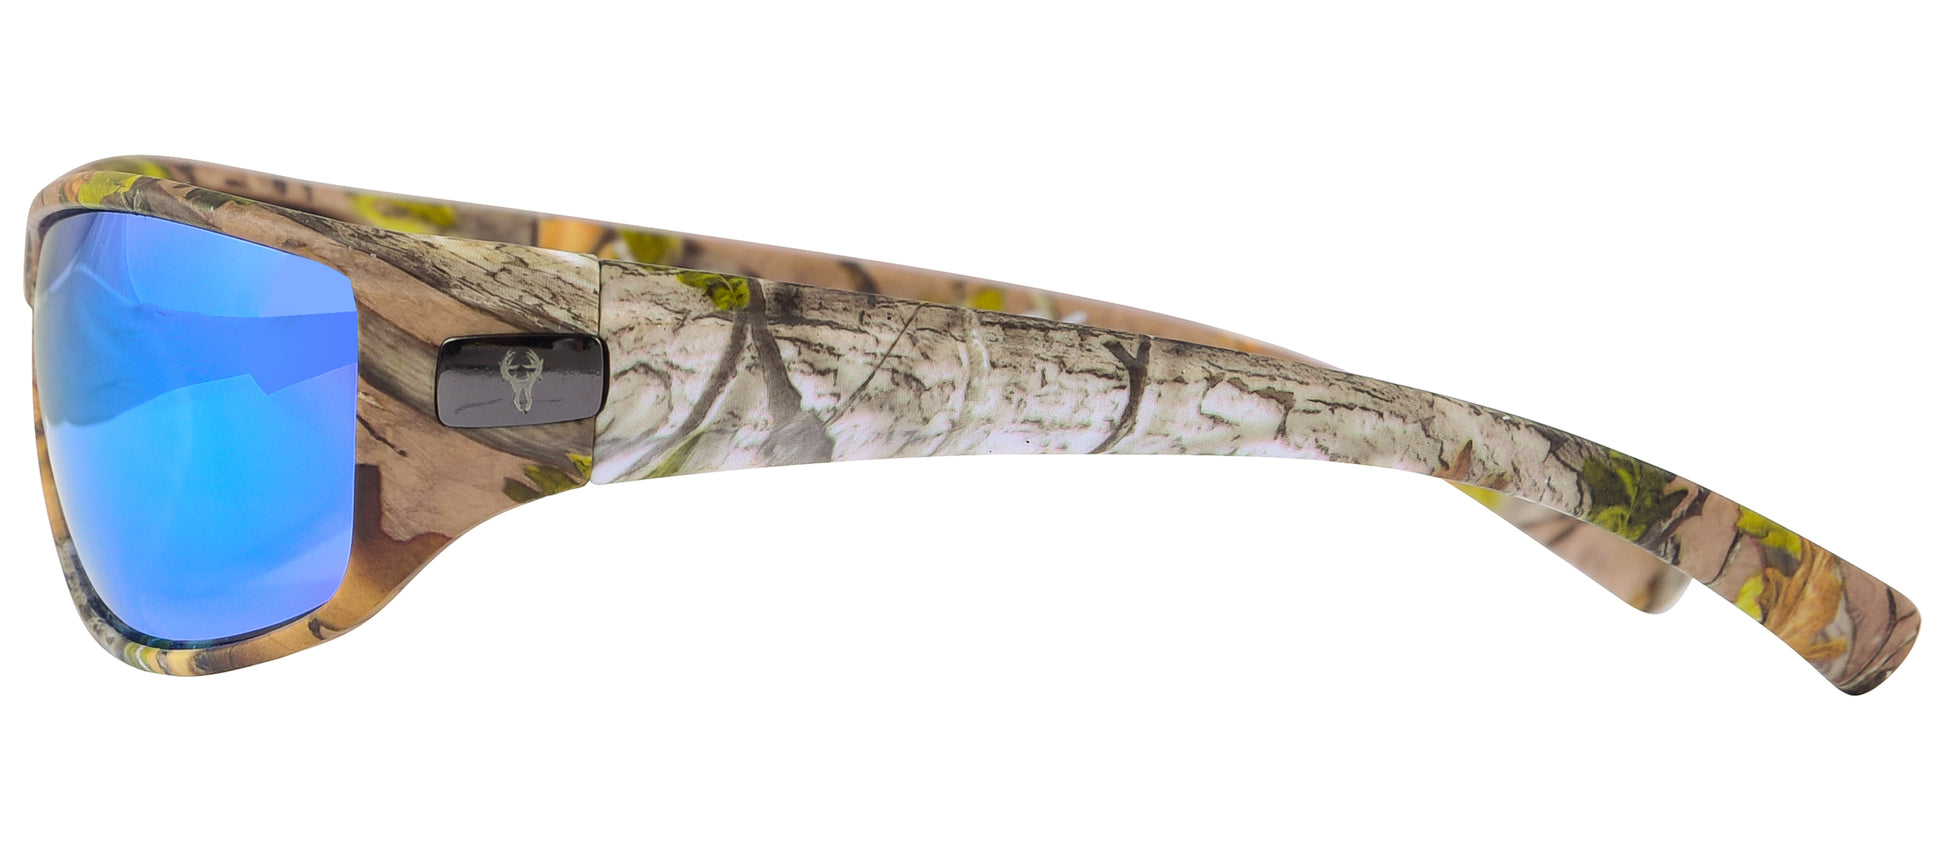 Hornz Brown Forest Camouflage Polarized Sunglasses for Men - Whitetail - Free Matching Microfiber Pouch